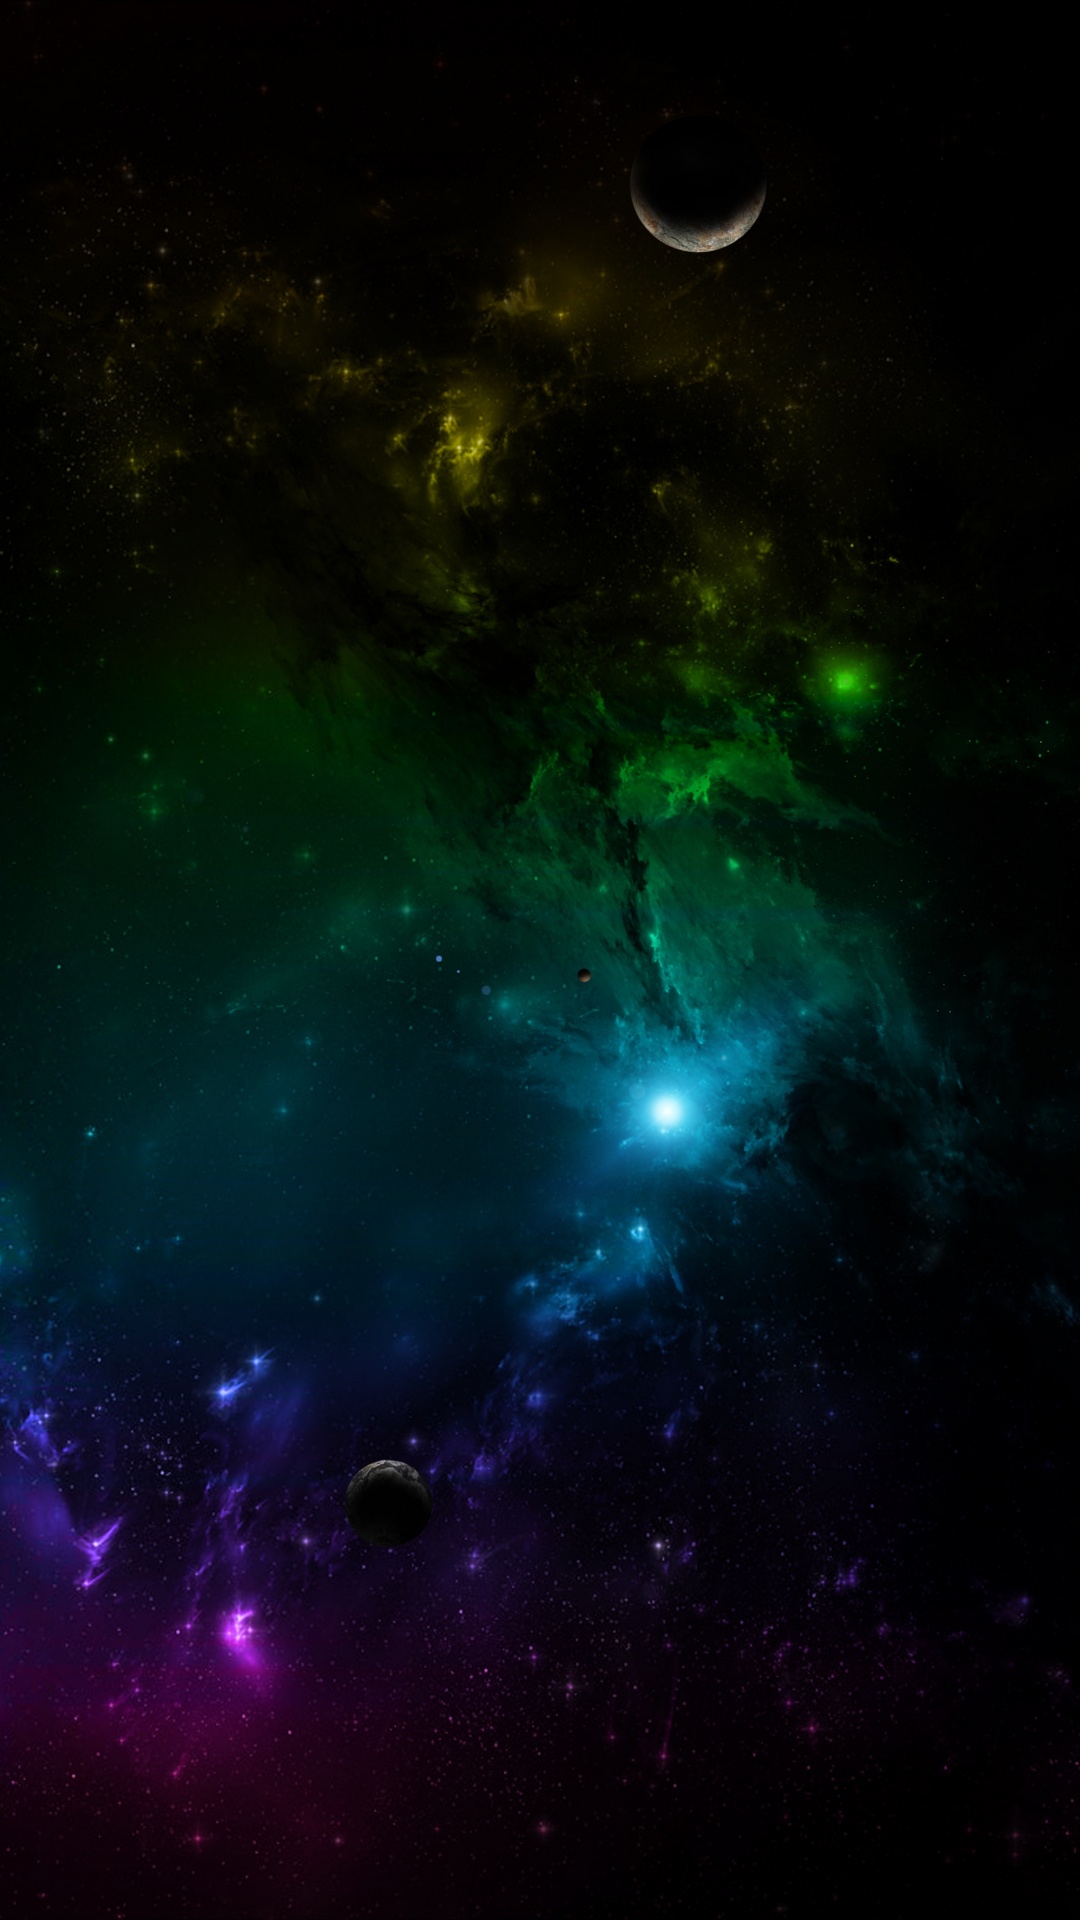 Green and Blue Galaxy Illustration. Wallpaper in 1080x1920 Resolution